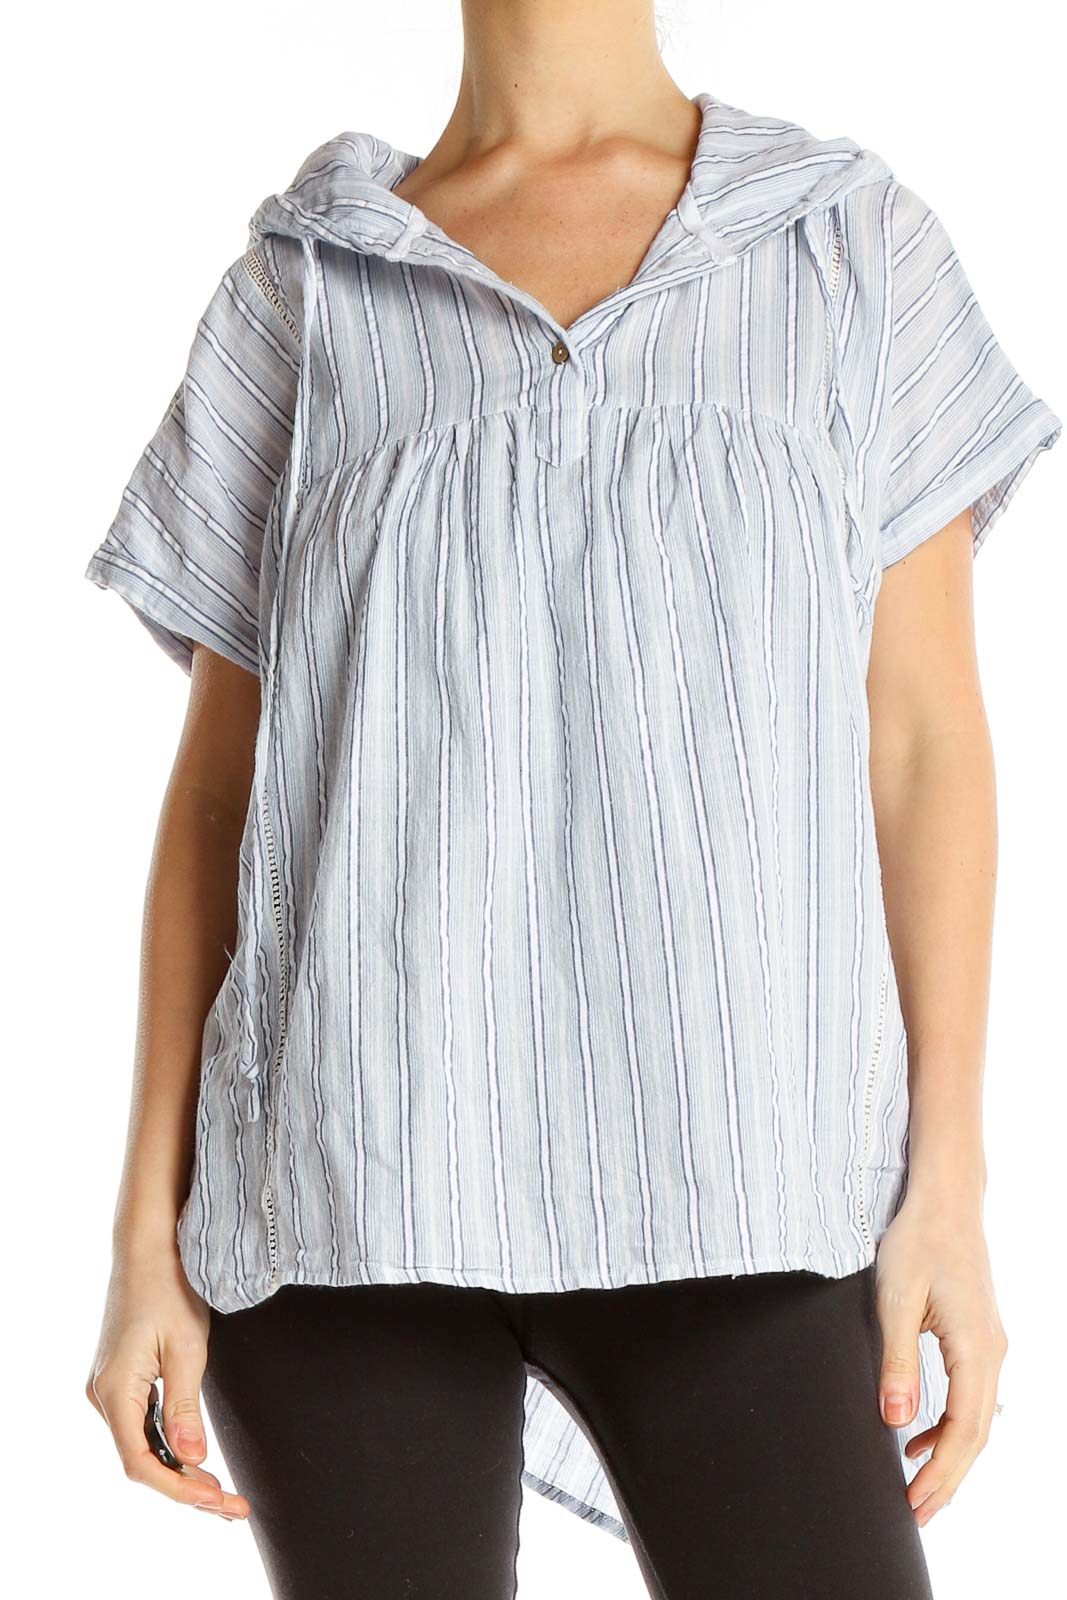 Blue White Striped Cotton Casual Shirt Front